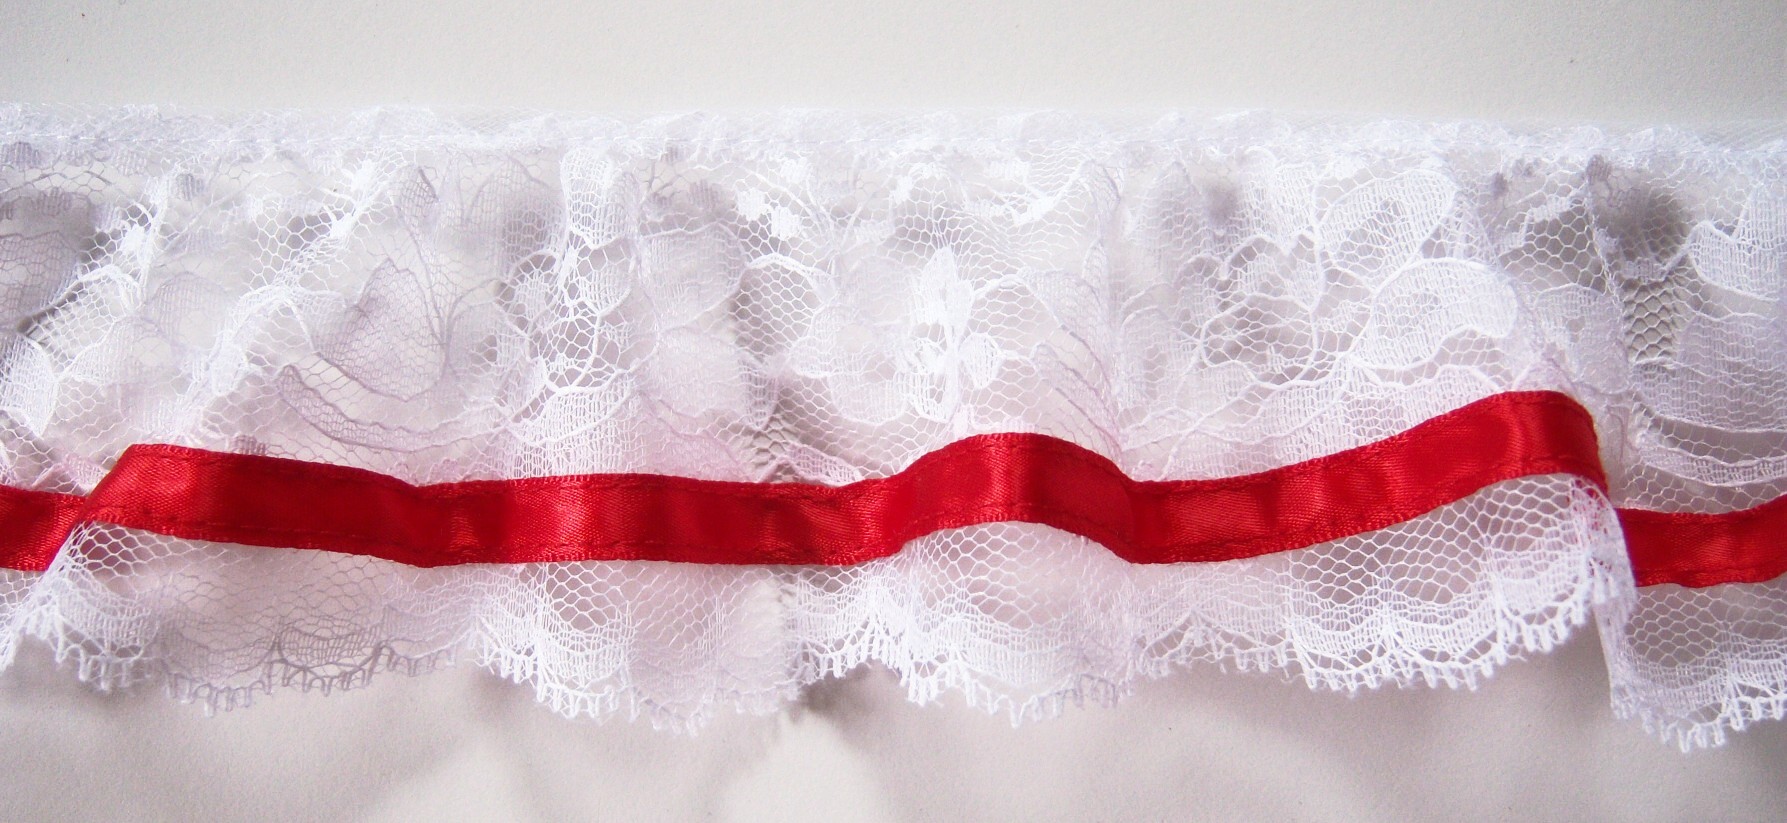 White/Red Satin Ruffled Lace